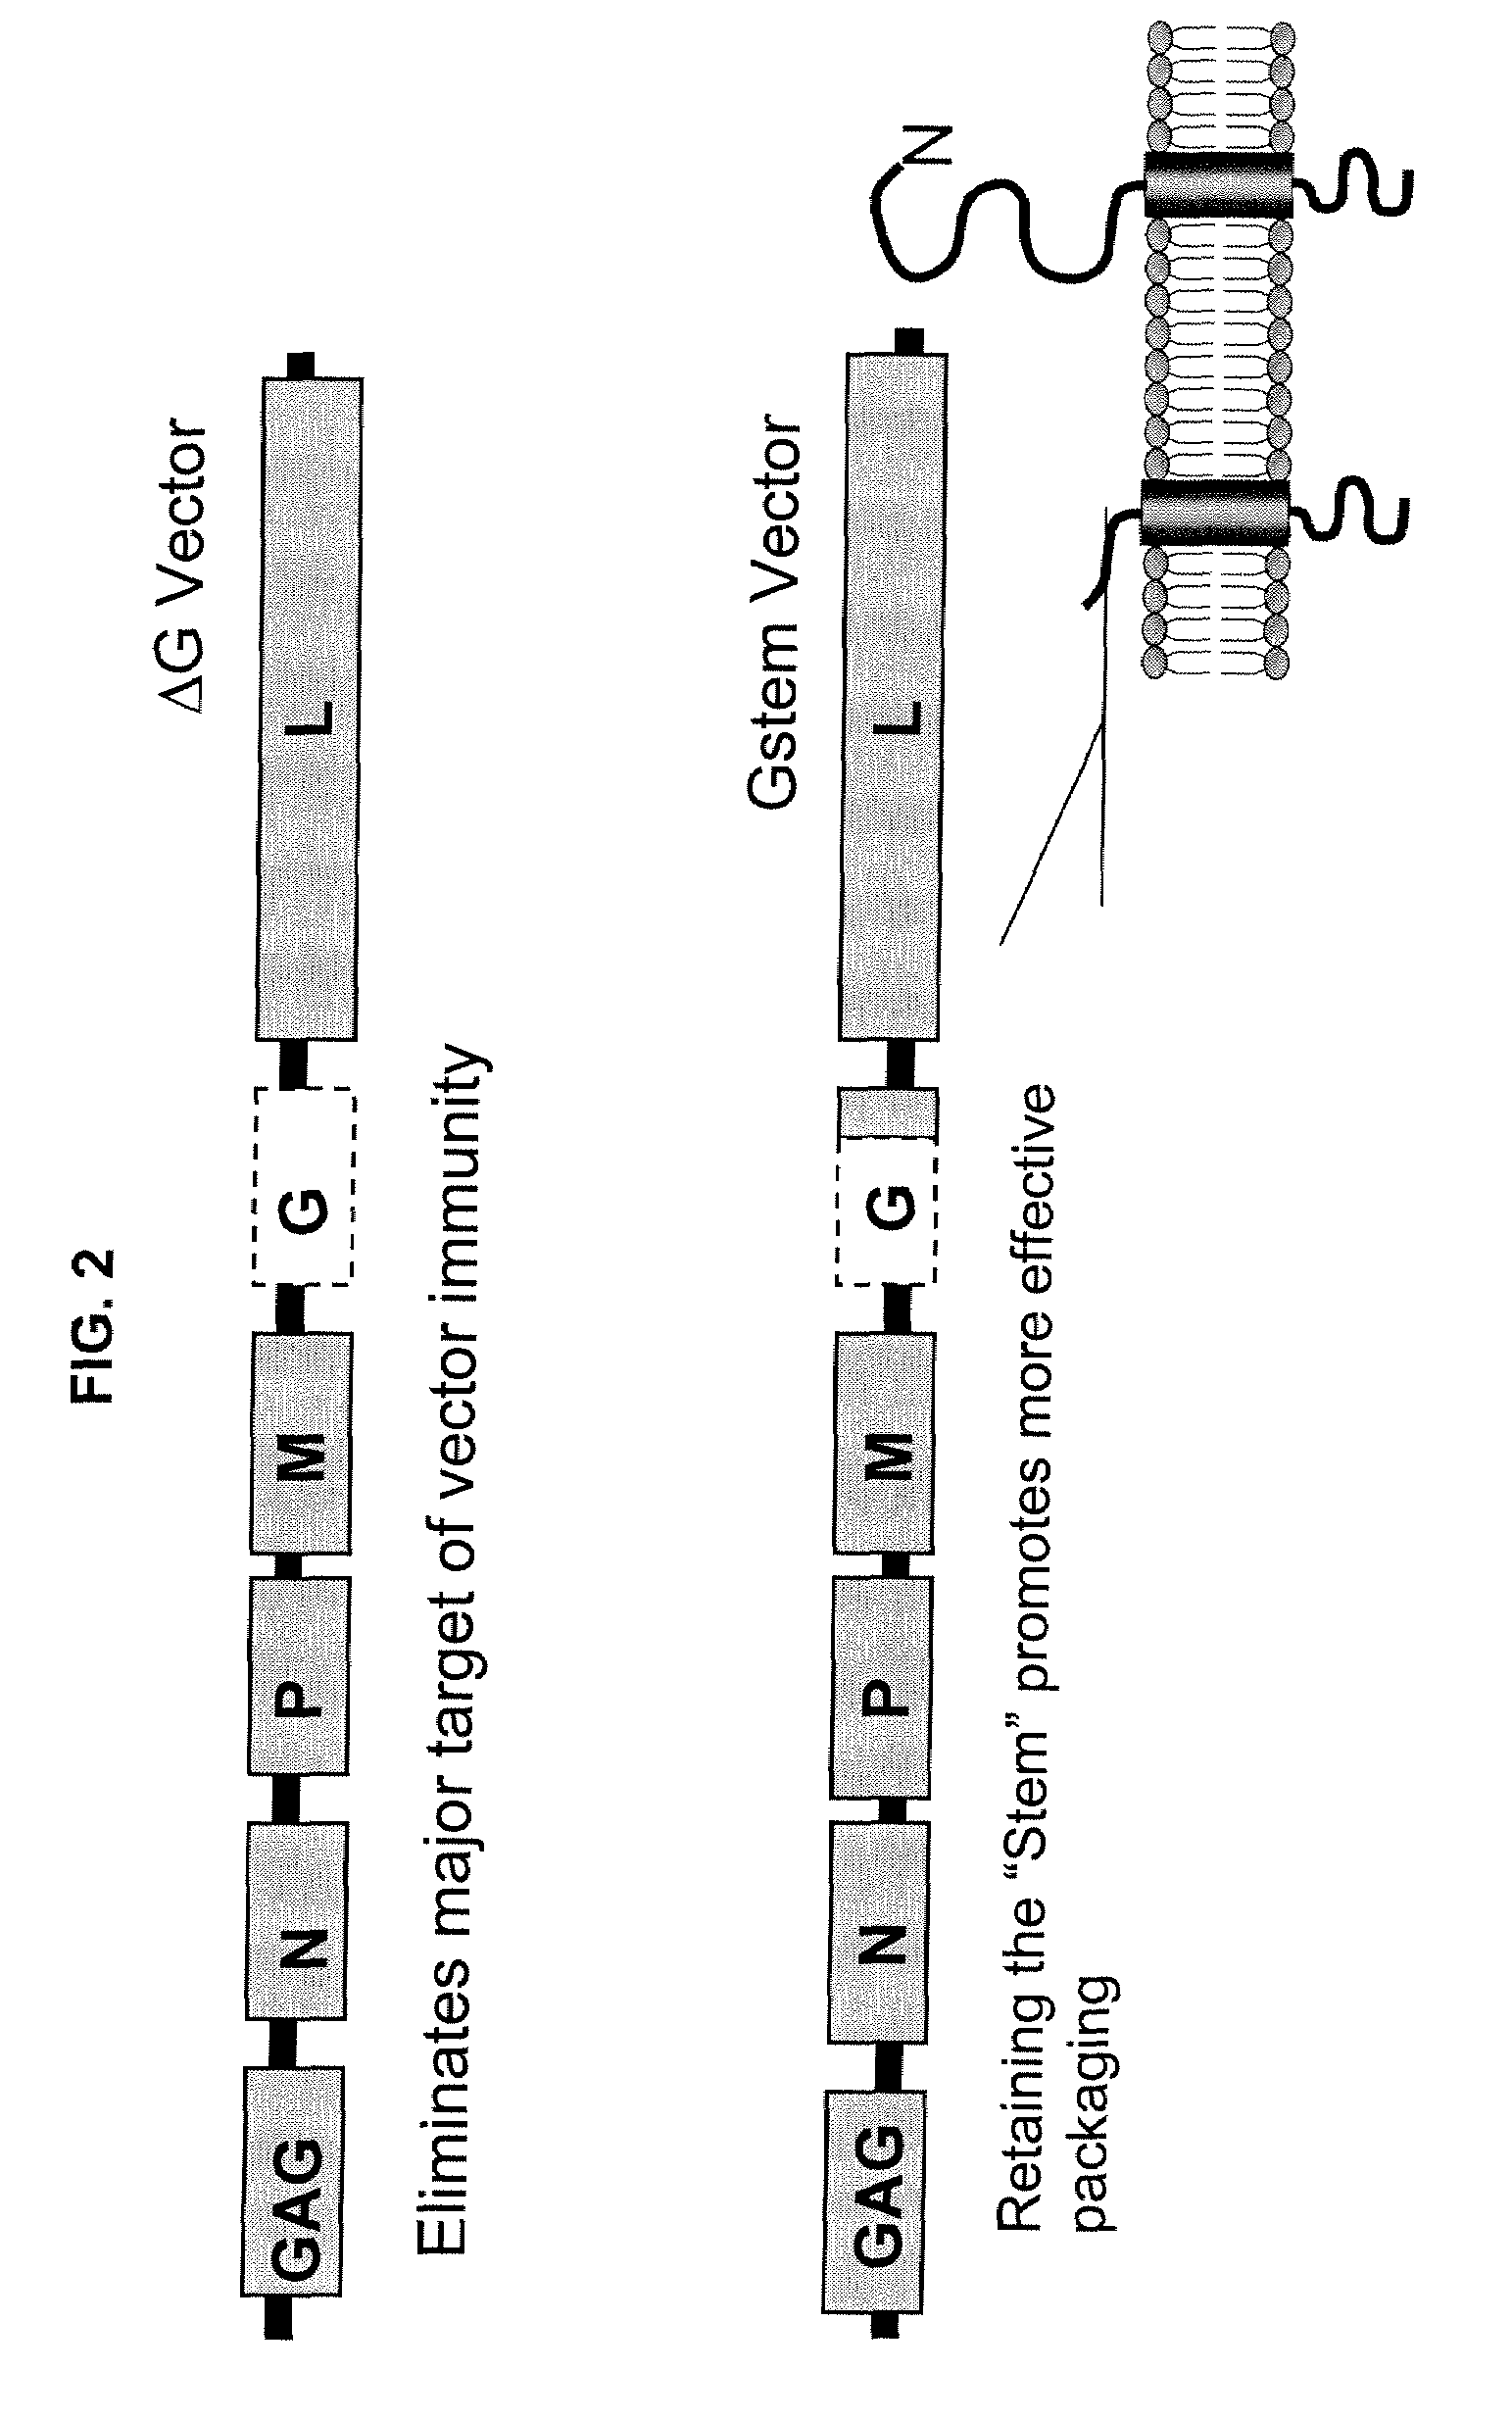 Methods for packaging propagation-defective vesicular stomatitis virus vectors using a stable cell line that expresses g protein